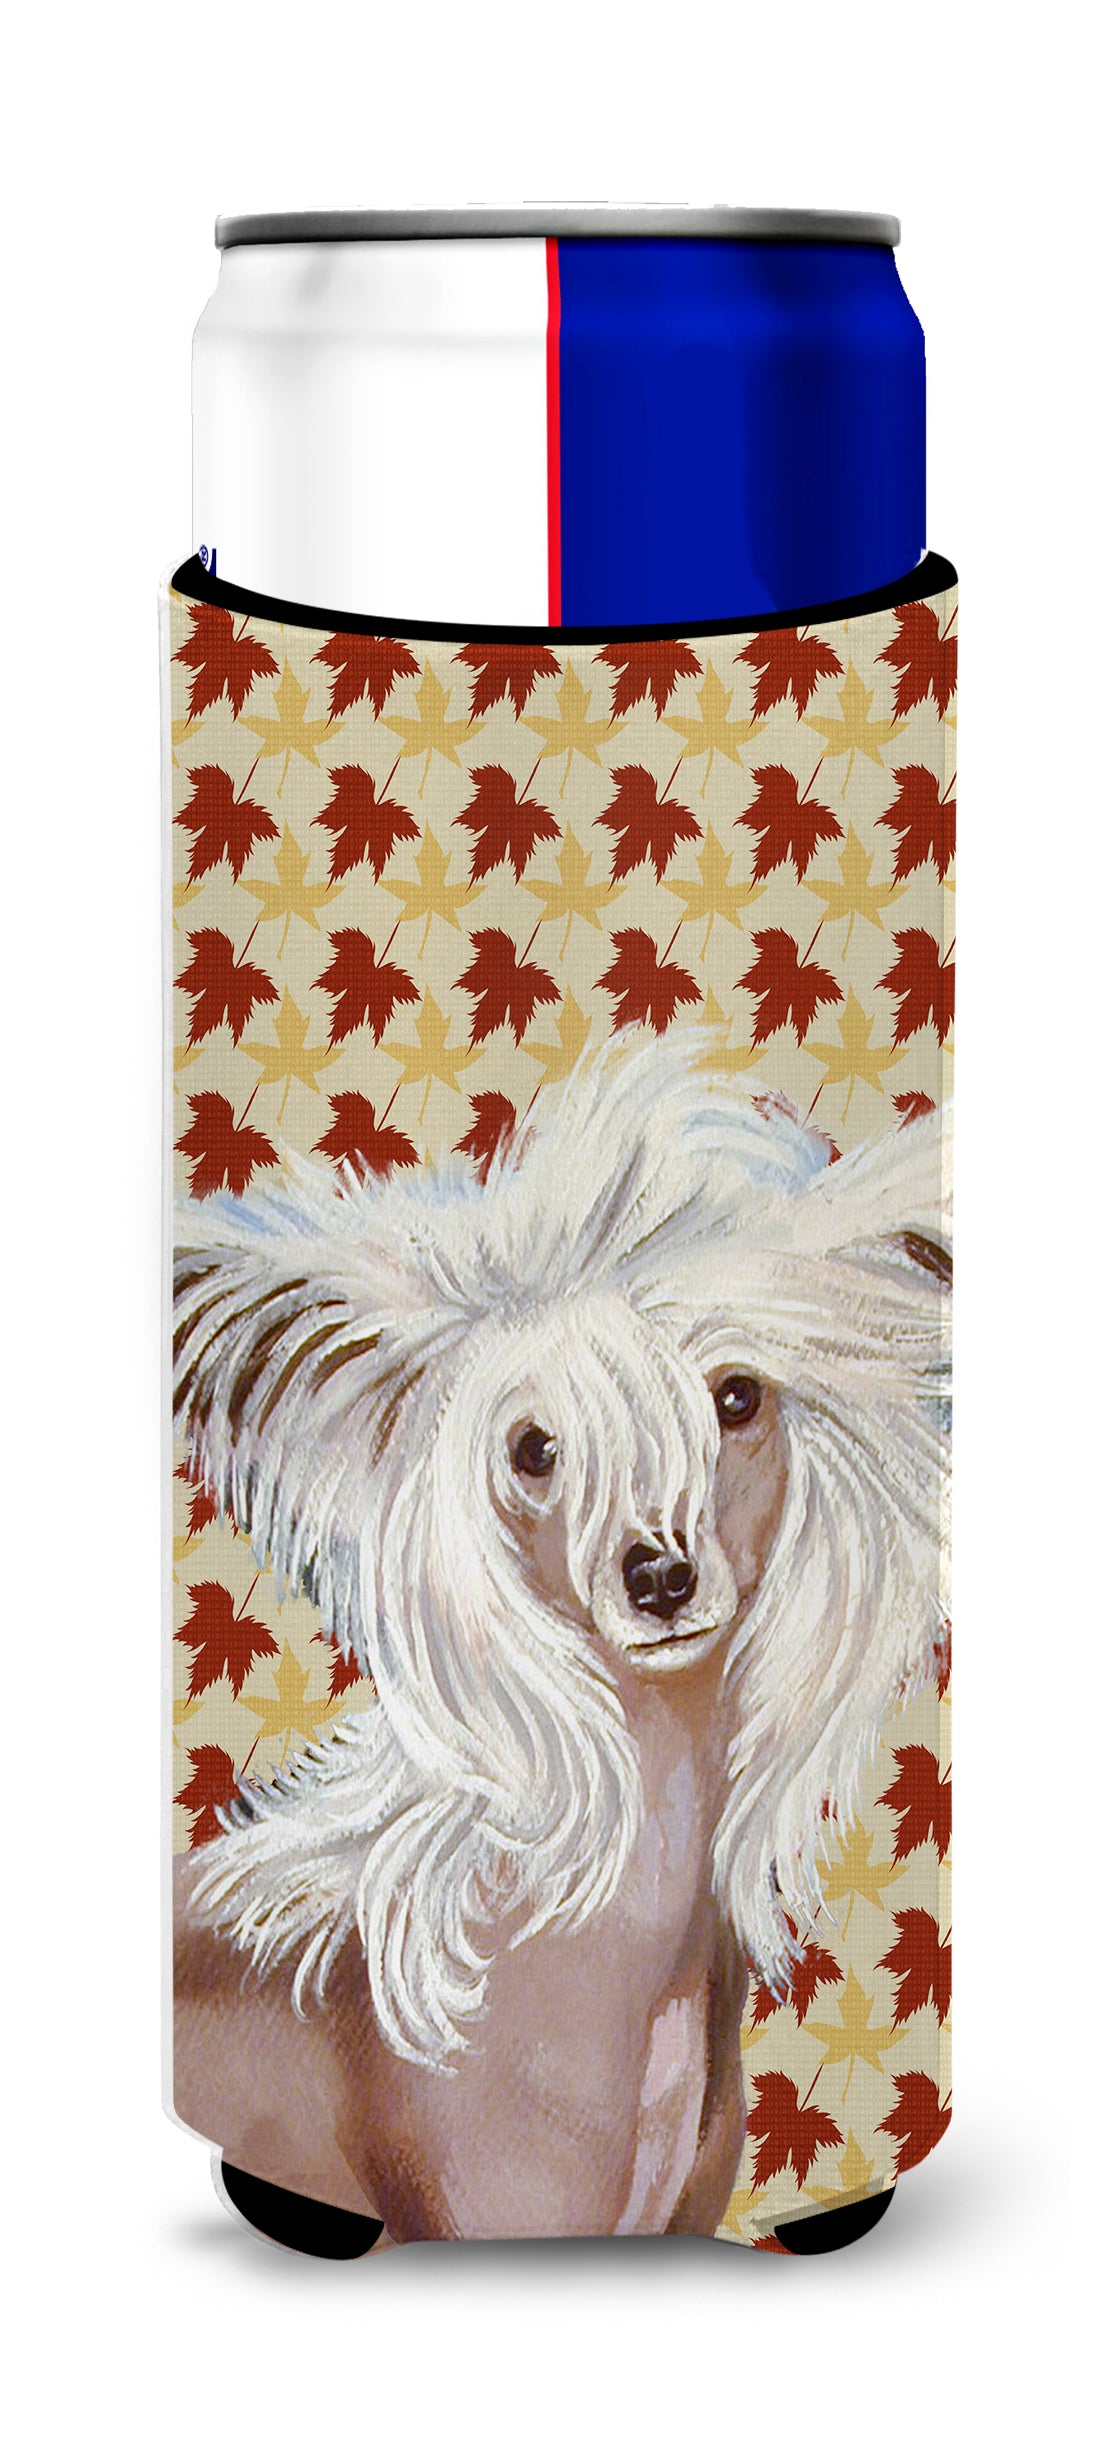 Chinese Crested Fall Leaves Portrait Ultra Beverage Insulators for slim cans LH9122MUK